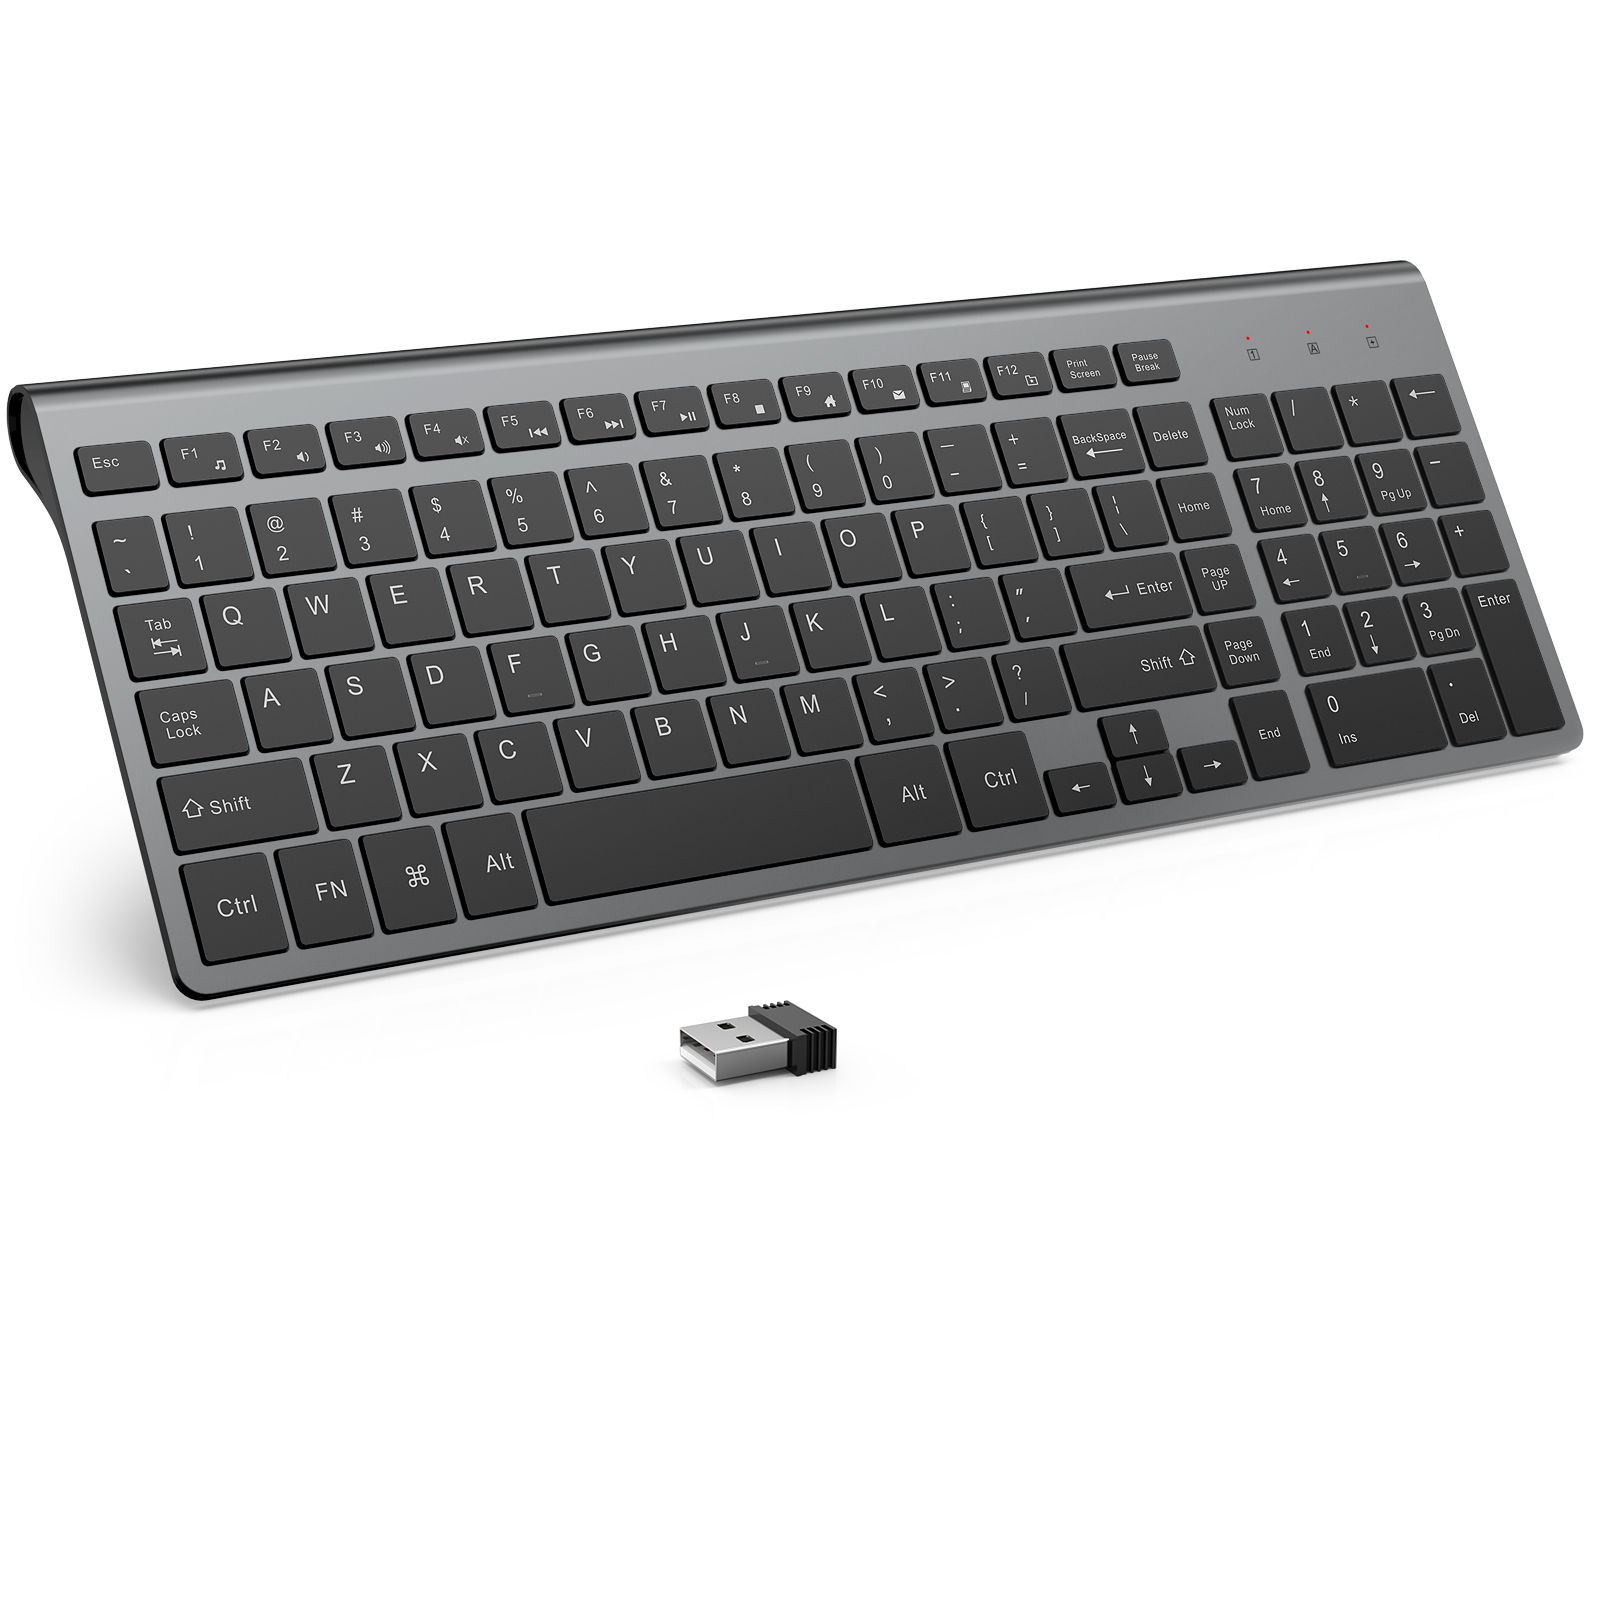 Wireless Keyboard, J JOYACCESS 2.4G Slim and Compact Wireless Keyboard with Numeric Pad for Laptop, MacBook Air, Apple, Computer, PC(Black and Grey)
